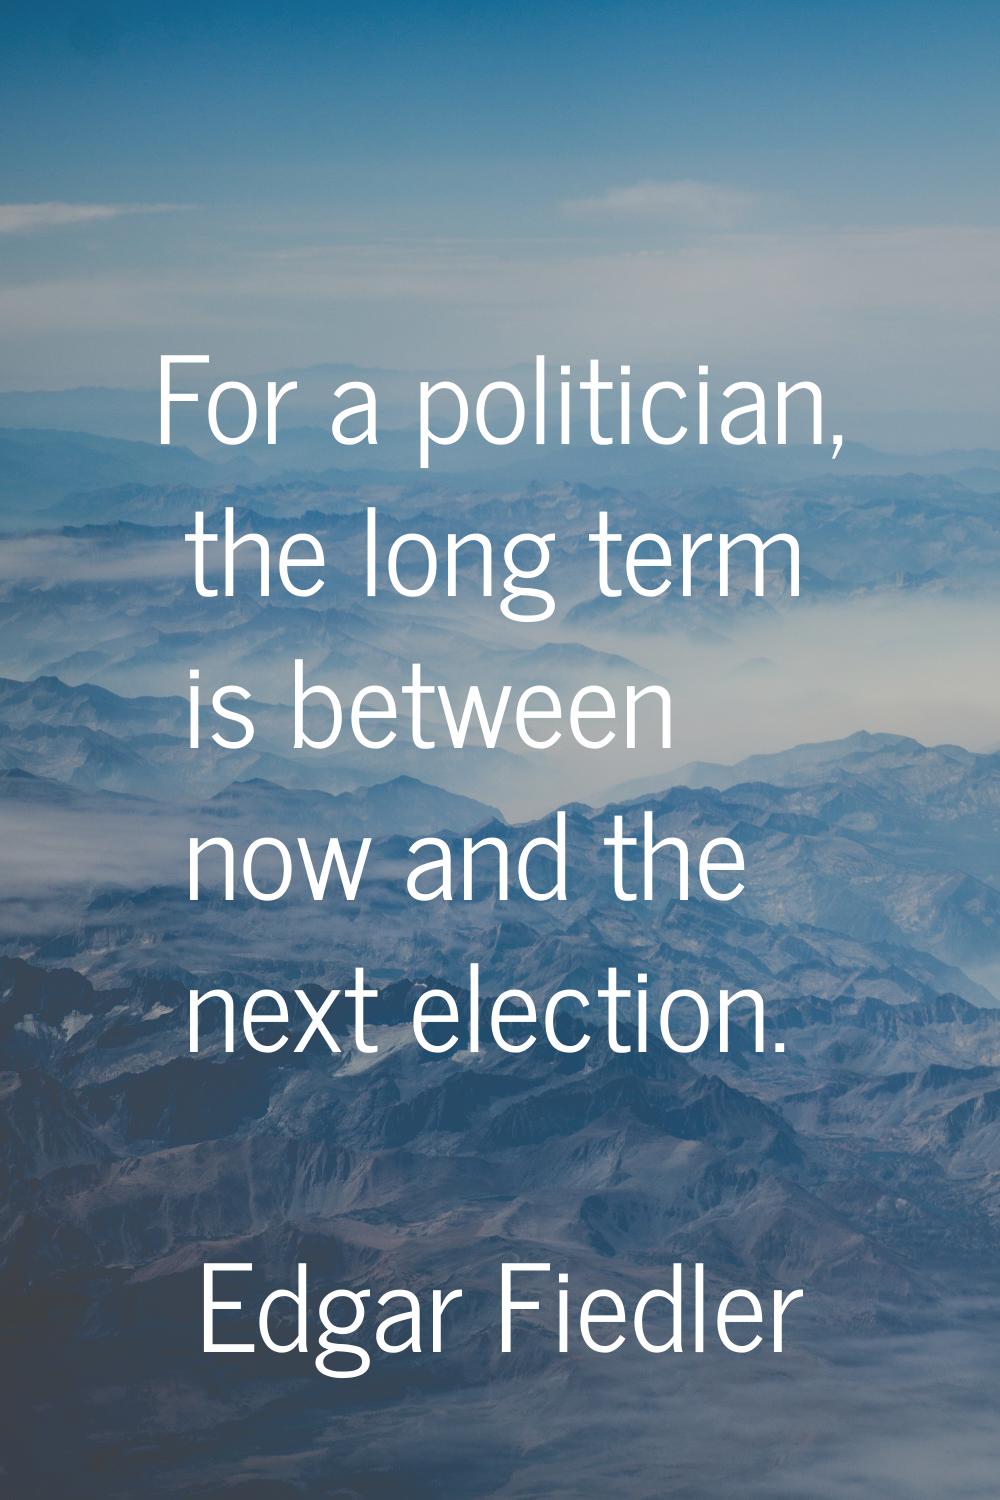 For a politician, the long term is between now and the next election.